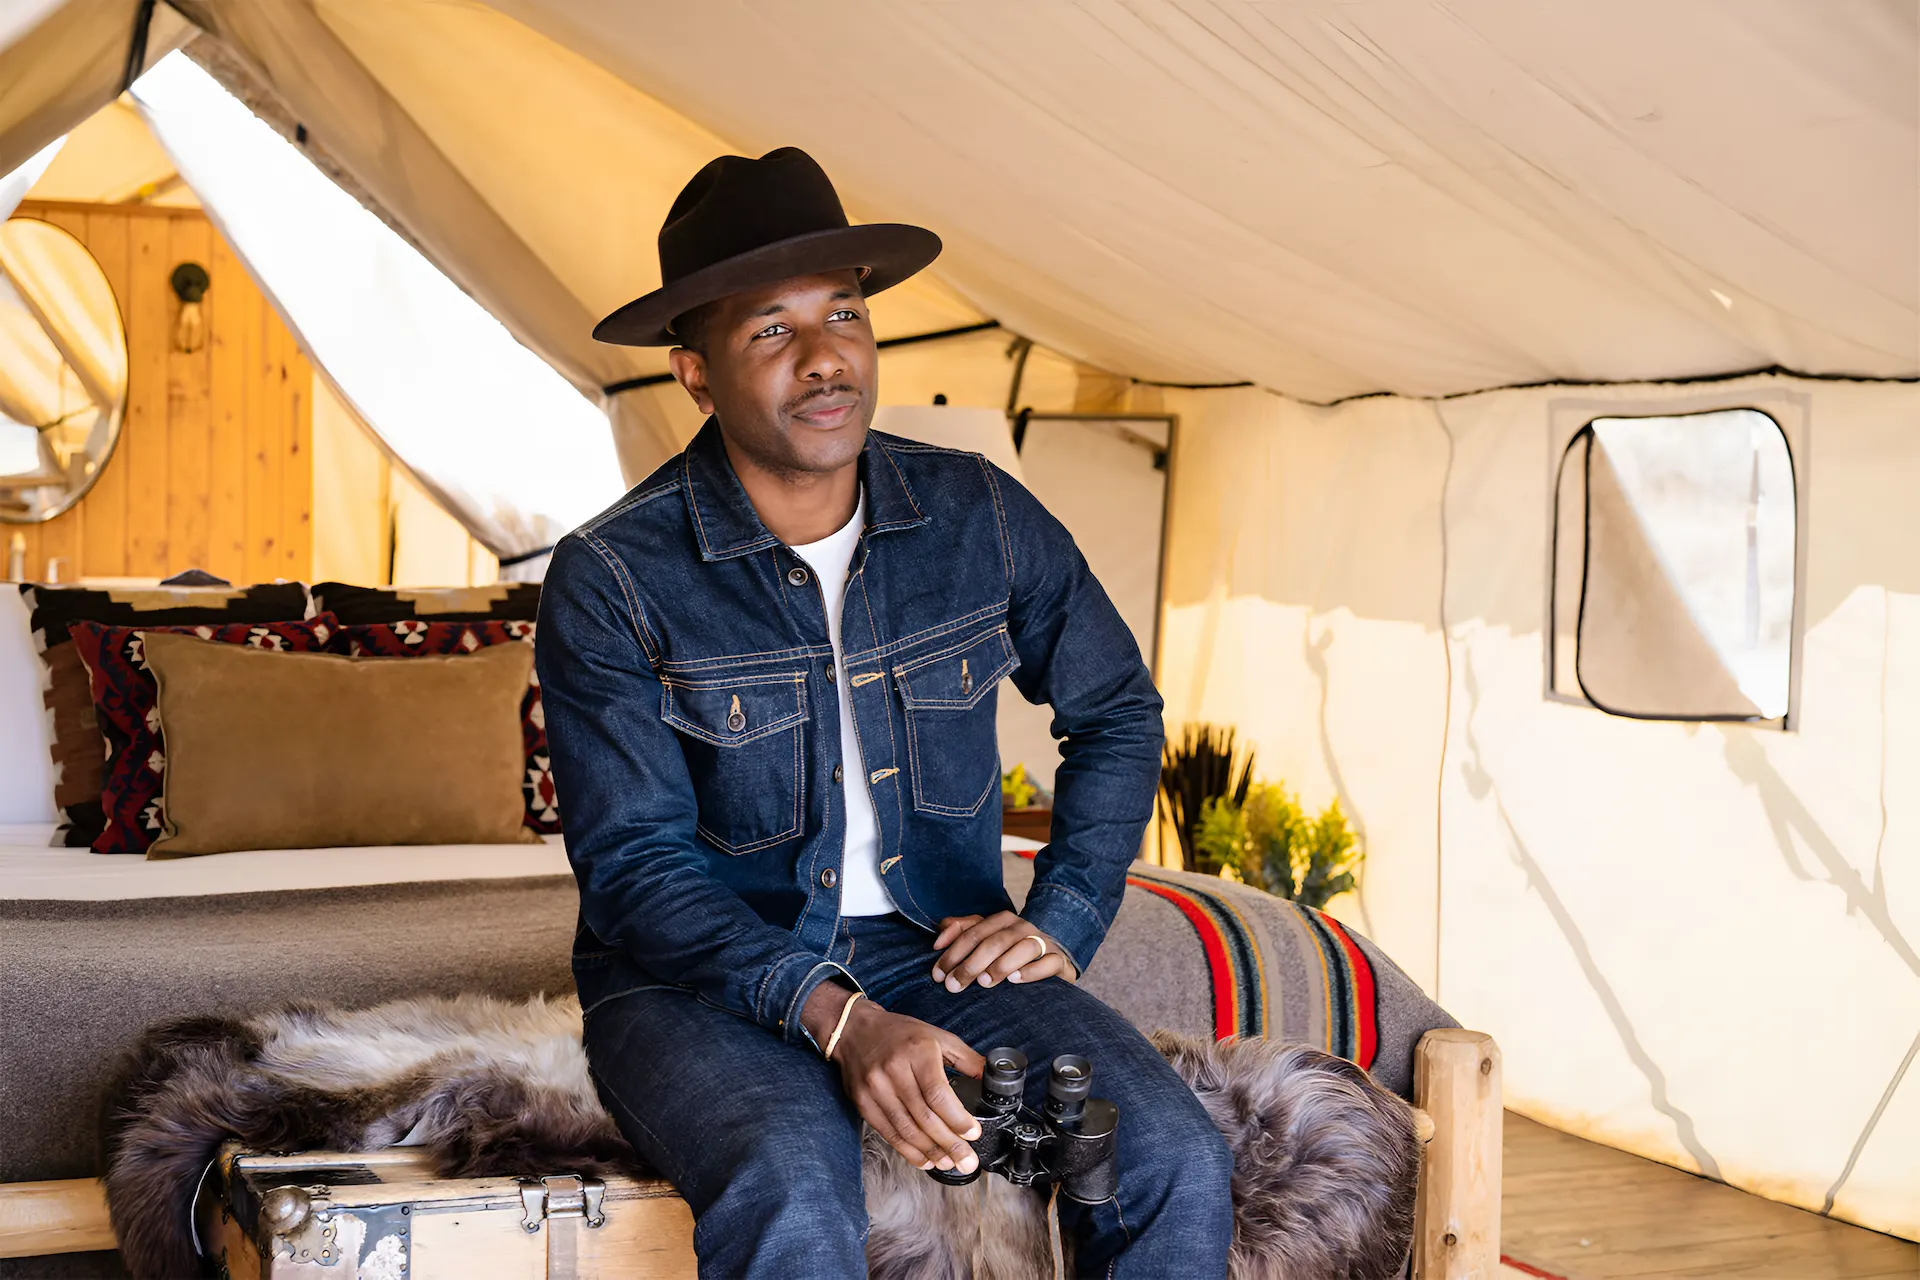 Man dressed in western style in a tent